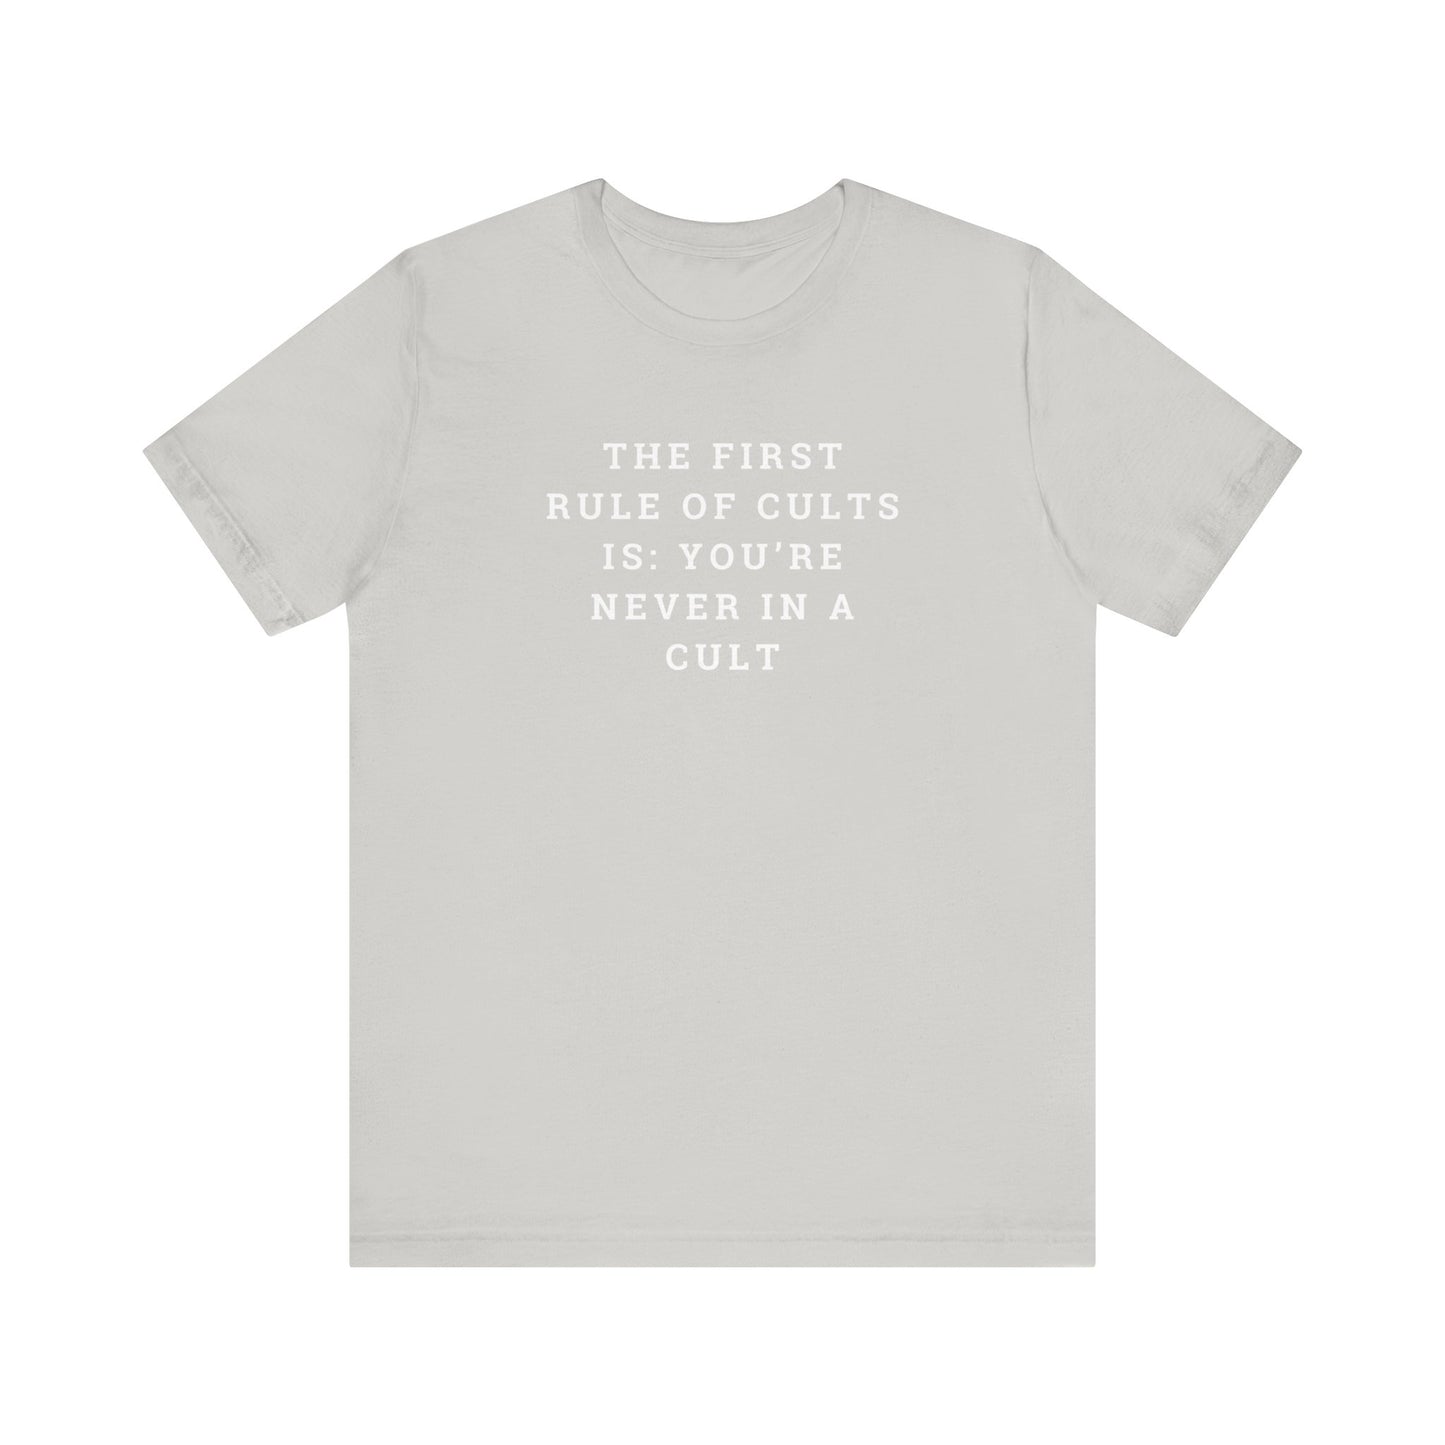 The First Rule of Cults is: You're Never In a Cult Unisex Jersey Short Sleeve Tee